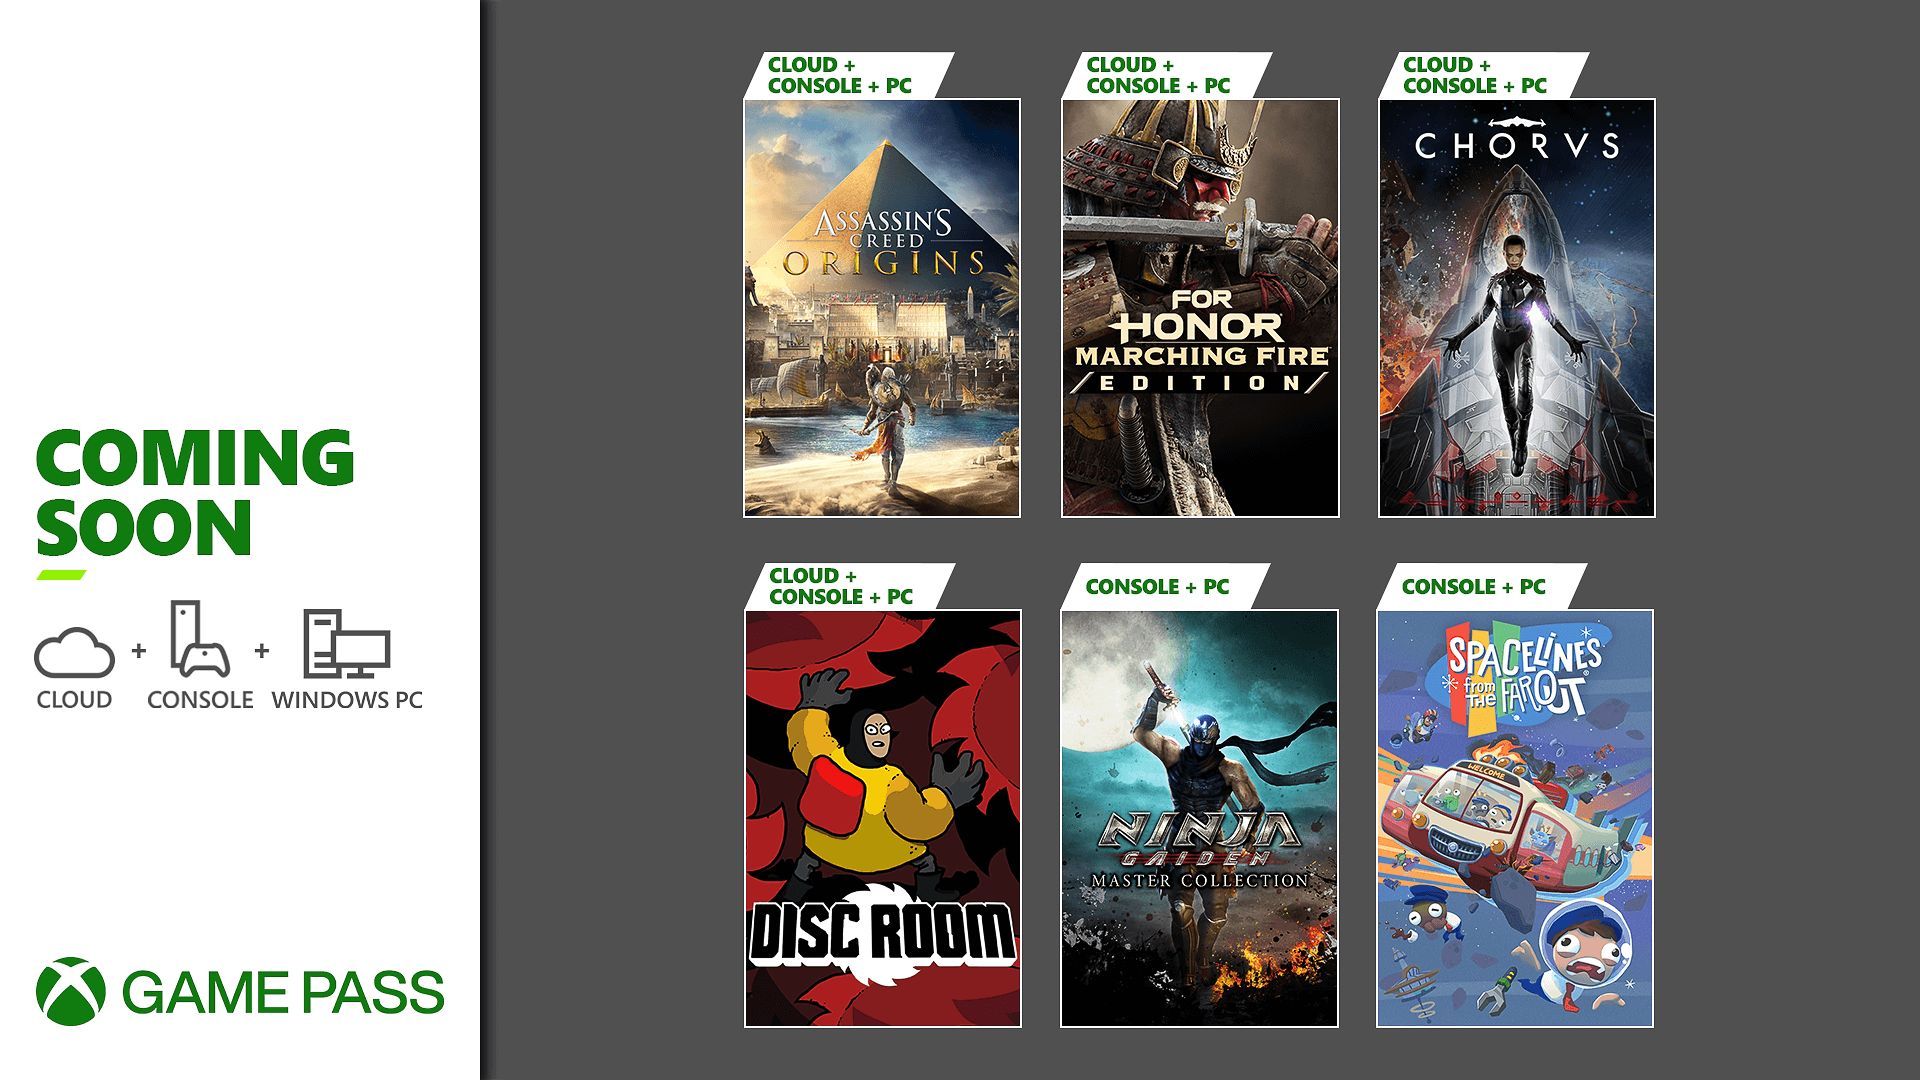 Circus Graan patrouille Coming to Xbox Game Pass: Assassin's Creed Origins, For Honor: Marching  Fire Edition, and More - Xbox Wire